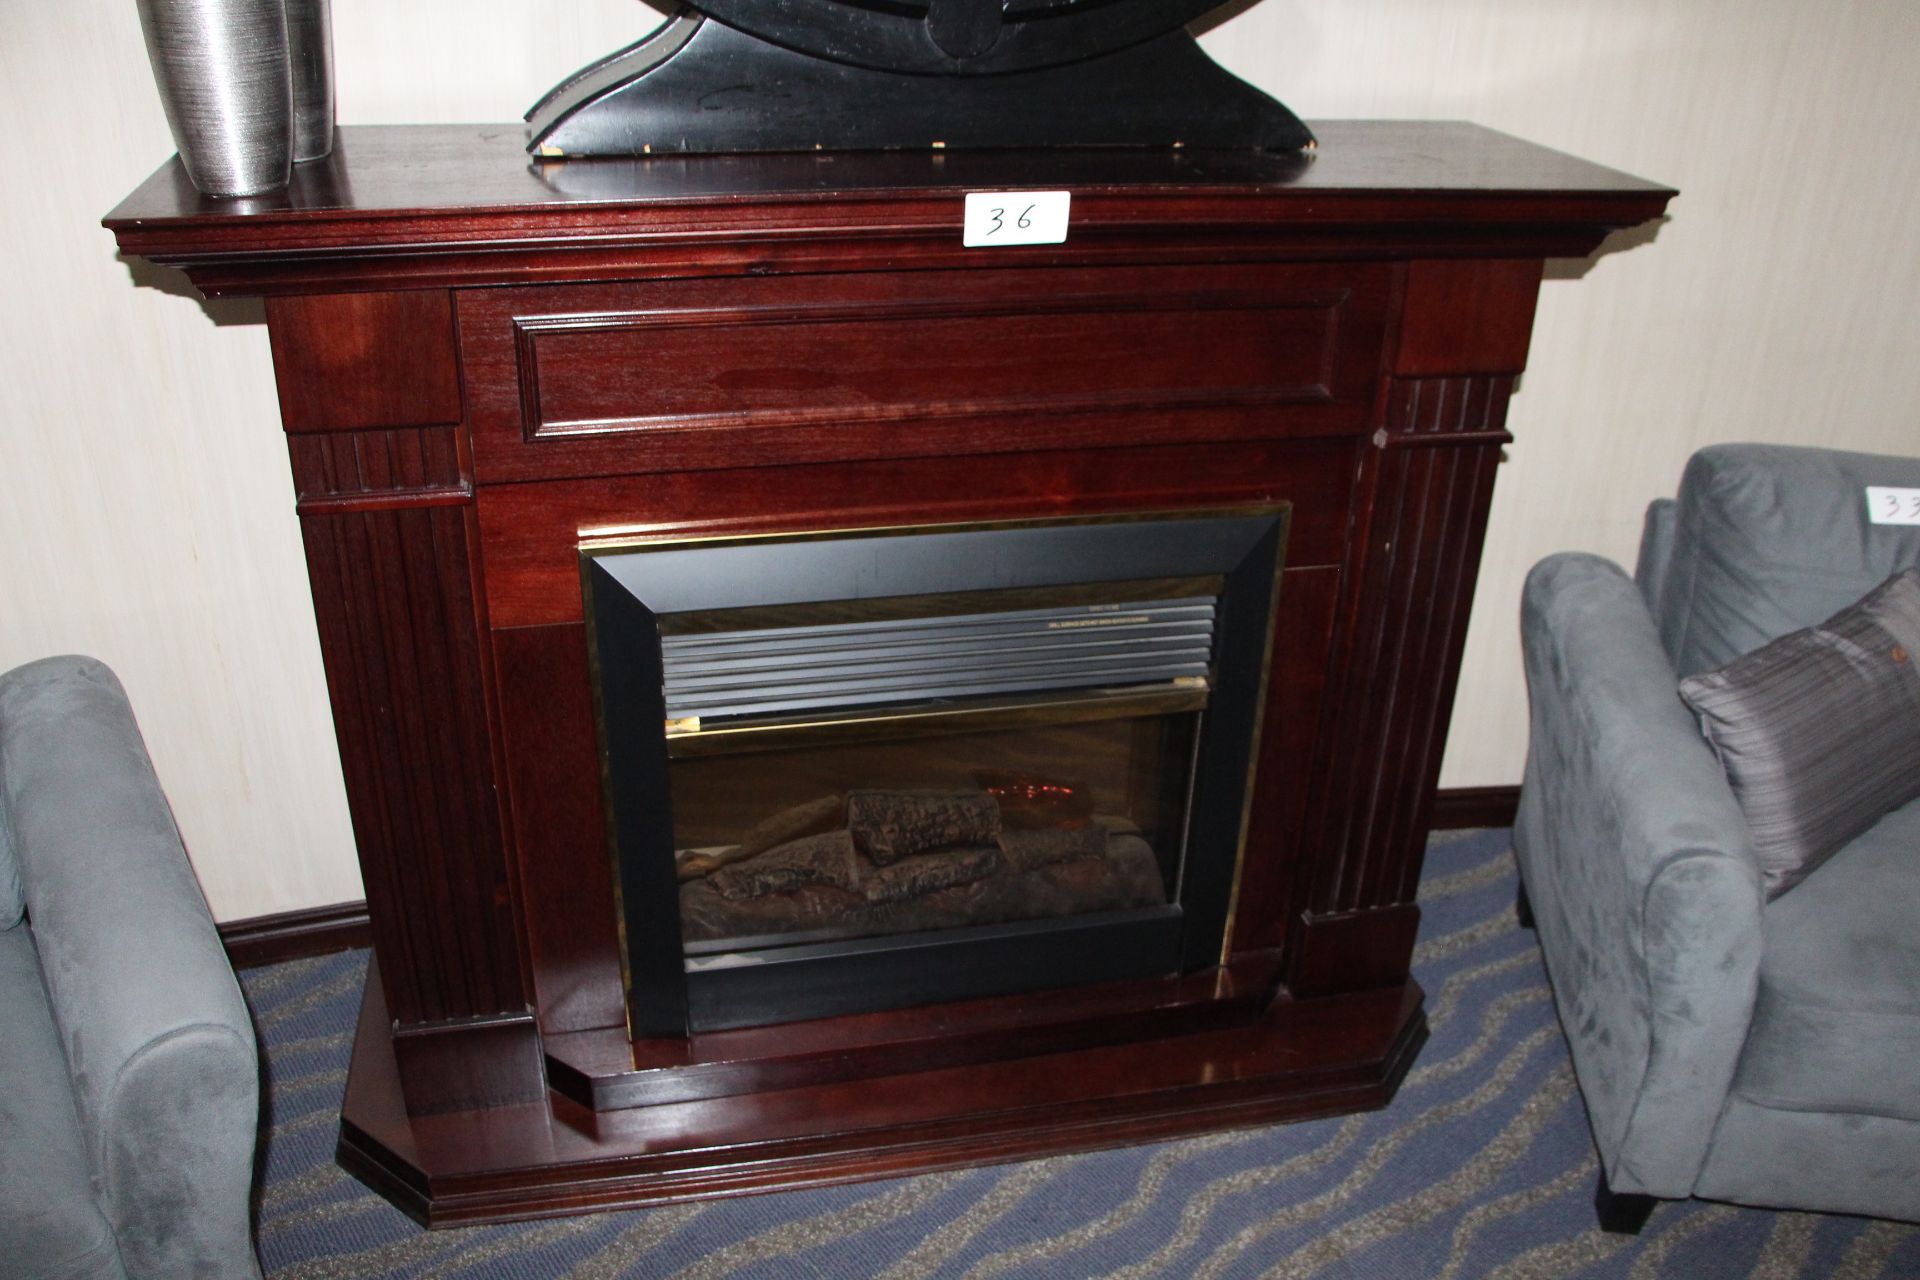 Electric fireplace c/w wooden mantel